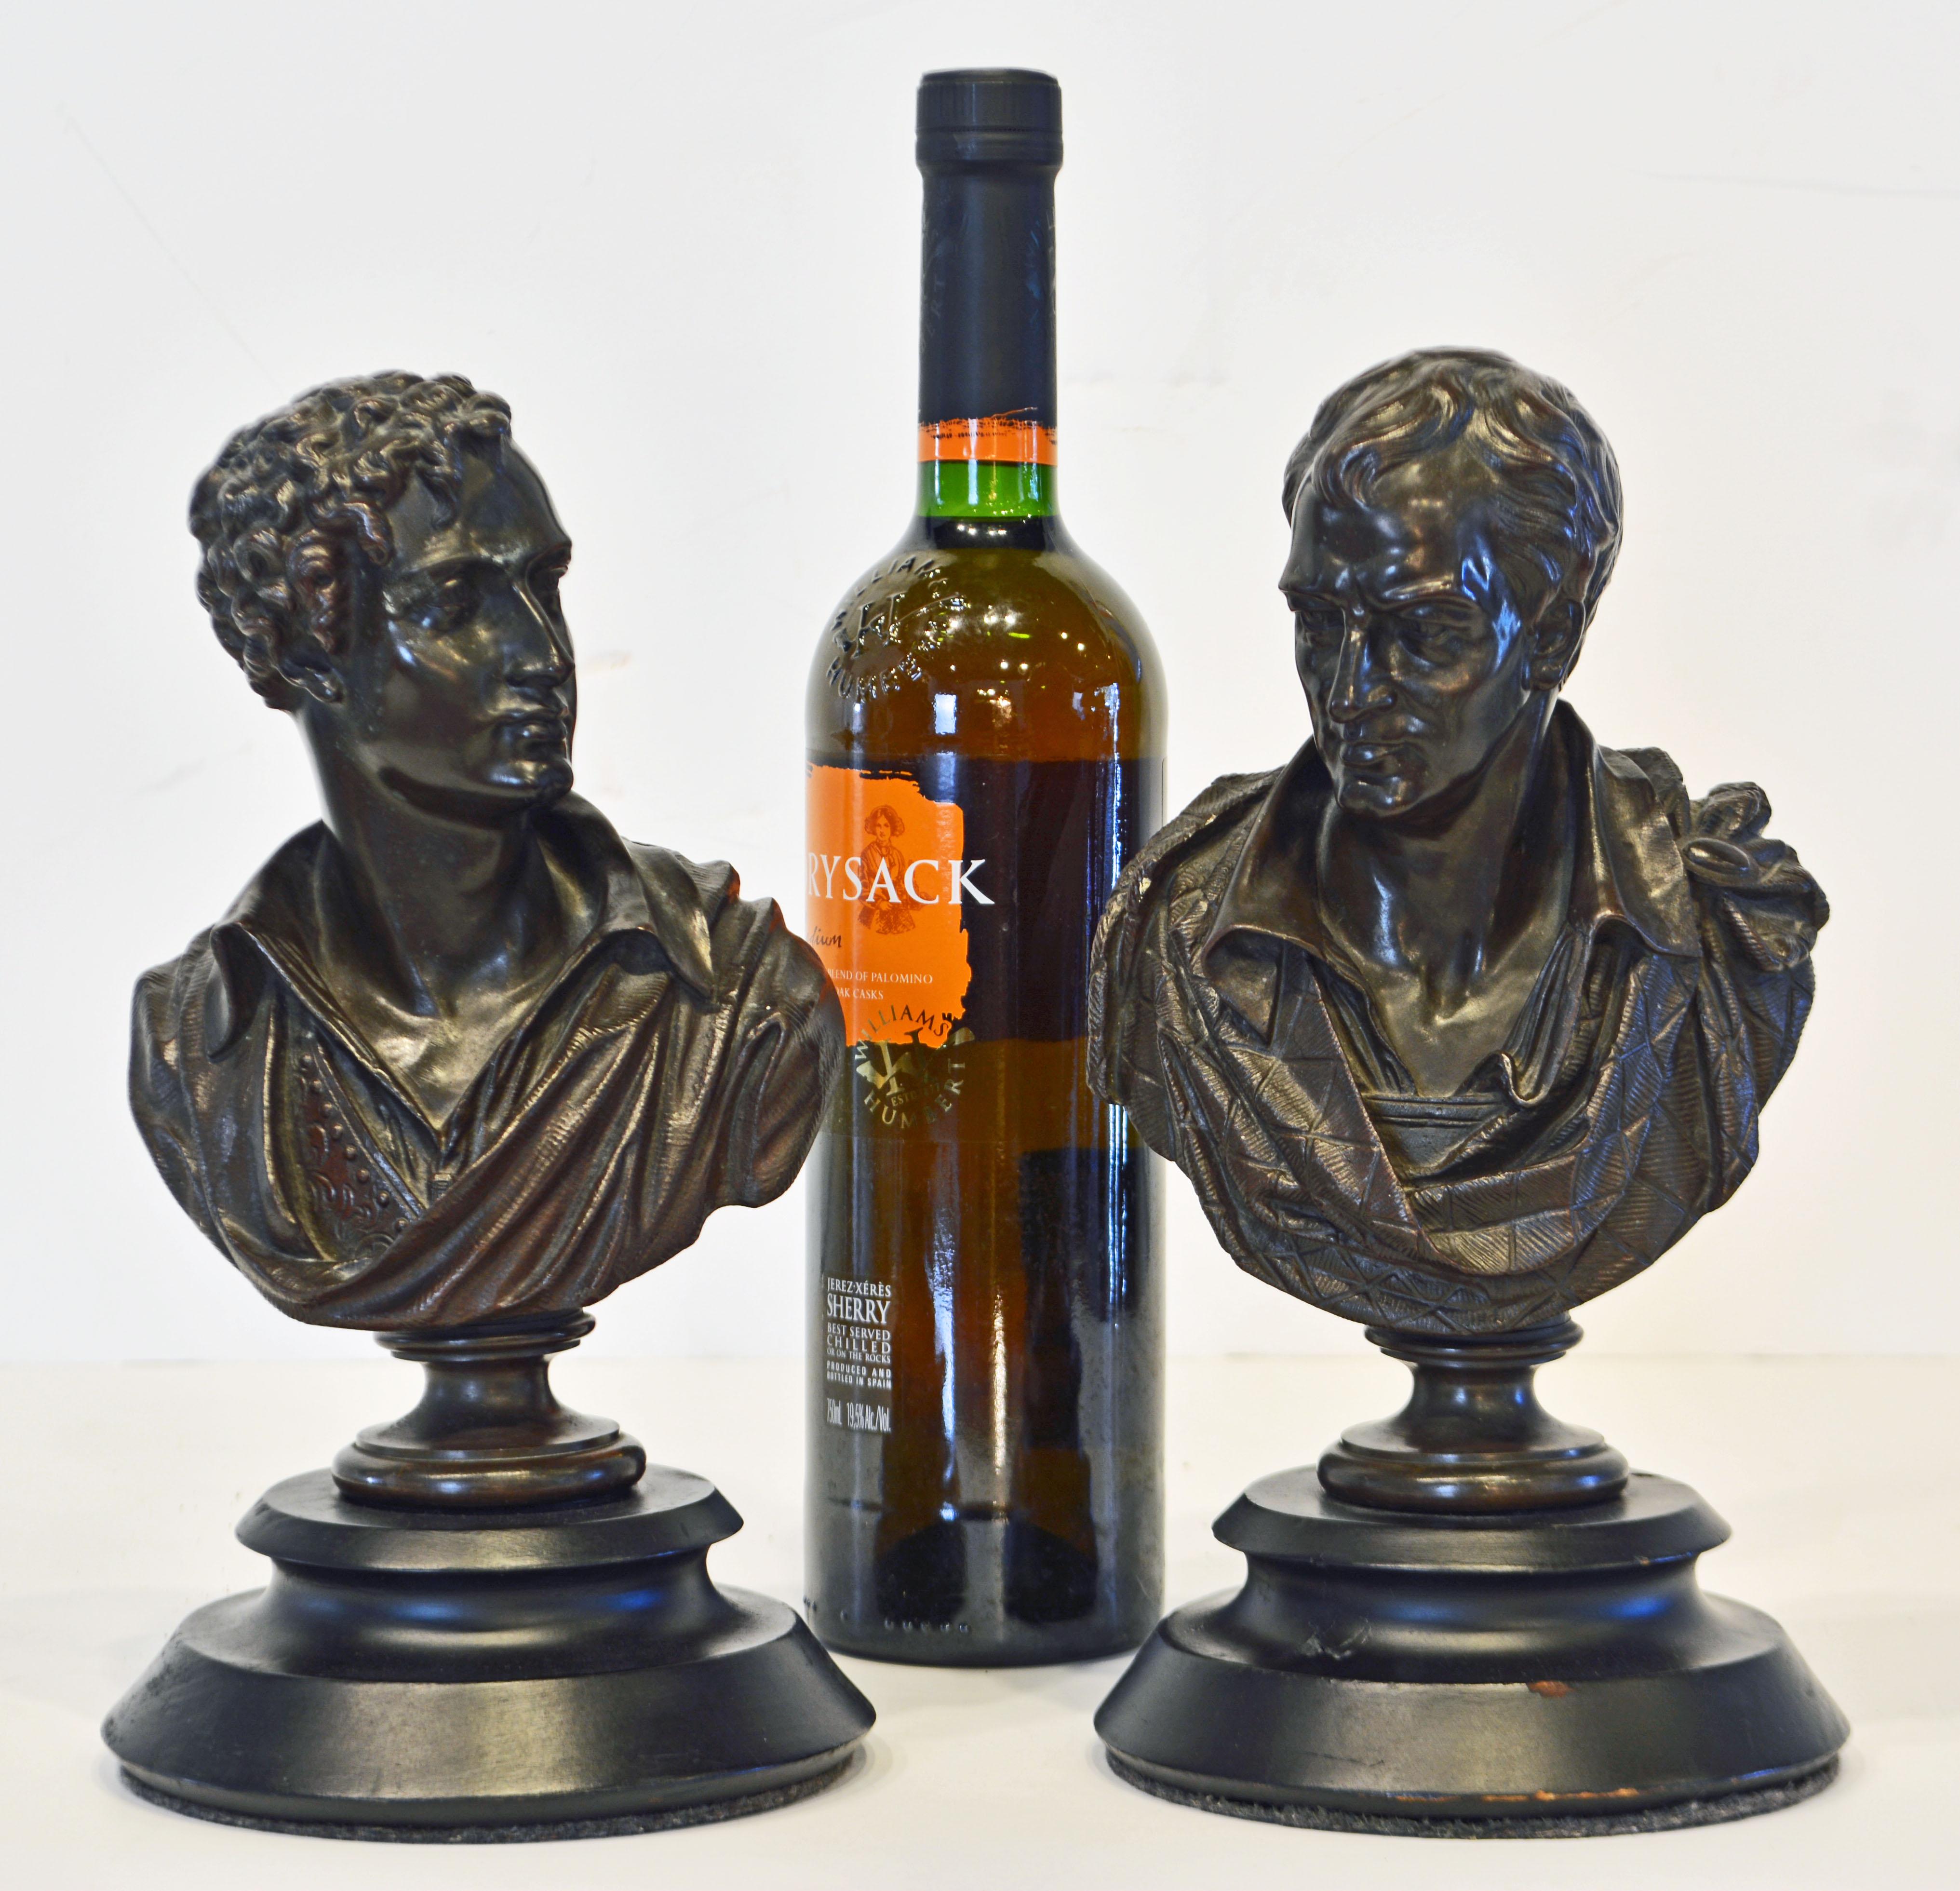 This pair of French patinated bronze busts on ebonized stepped bases, dating to the late 19th century, by Ernest Eugene Hiolle (1834-1886) are inscribed Sir Walter Scott and Lord Byron two of England's most iconic literary figures. Both are also